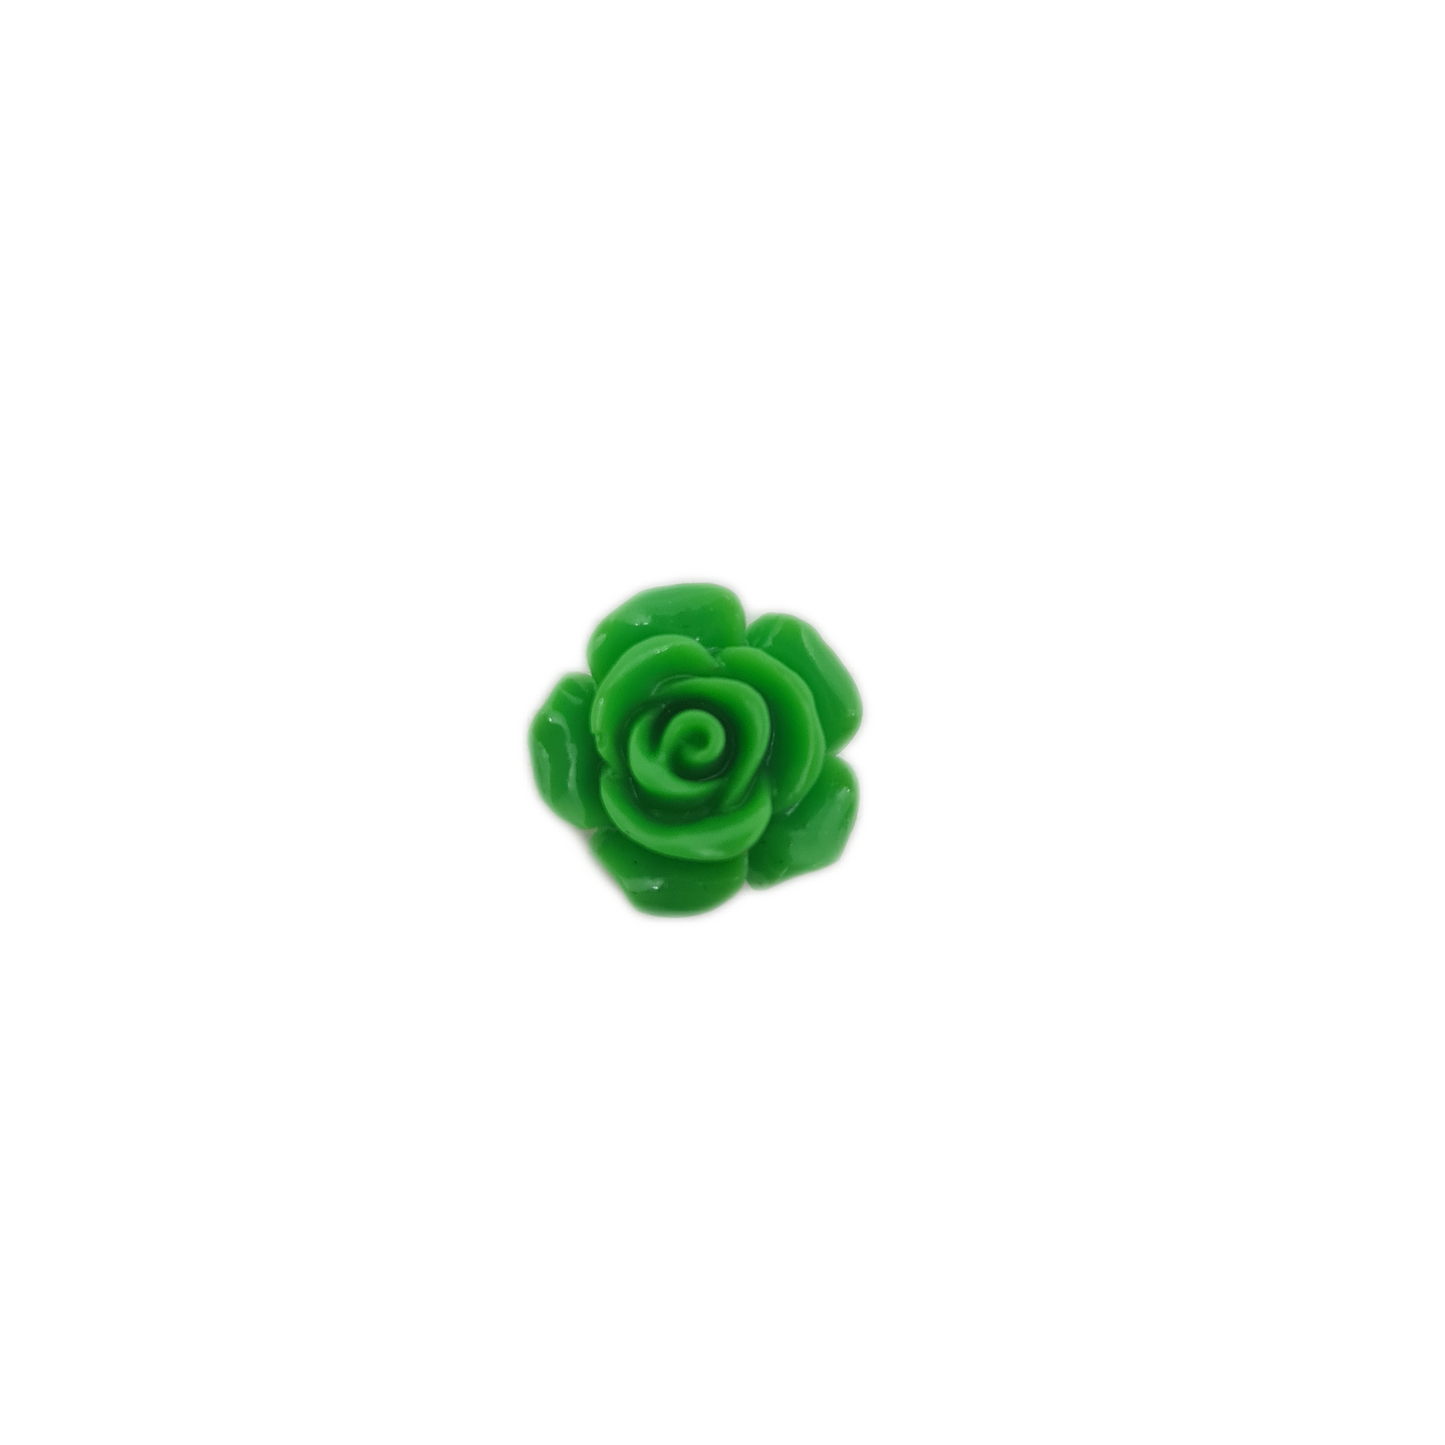 10pc Green Resin Flower Cabochons